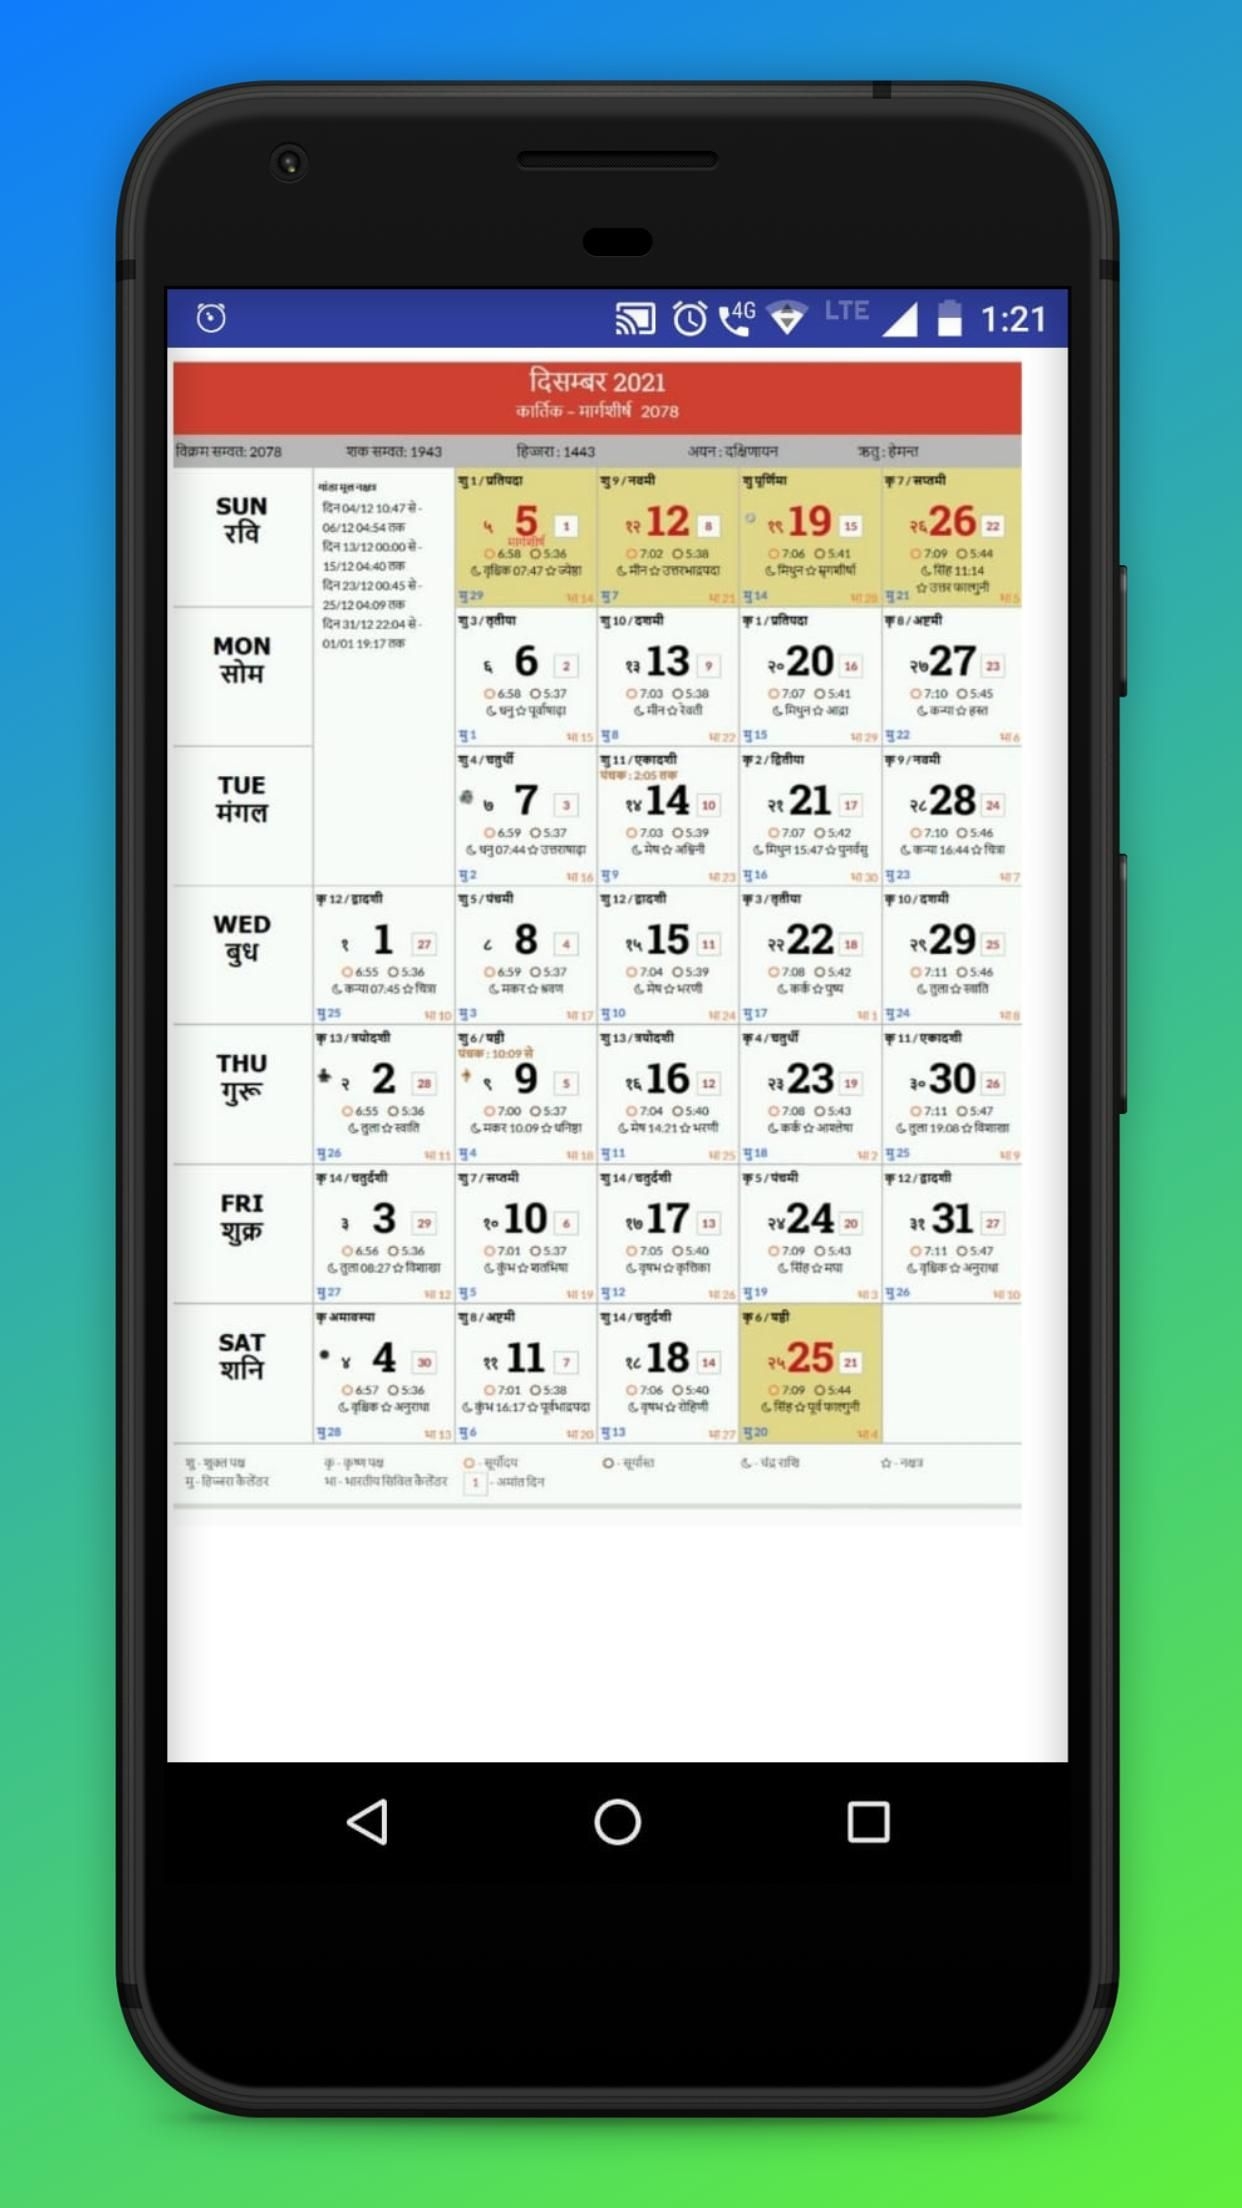 Hindi Calendar 2021 With Festival For Android Apk Download